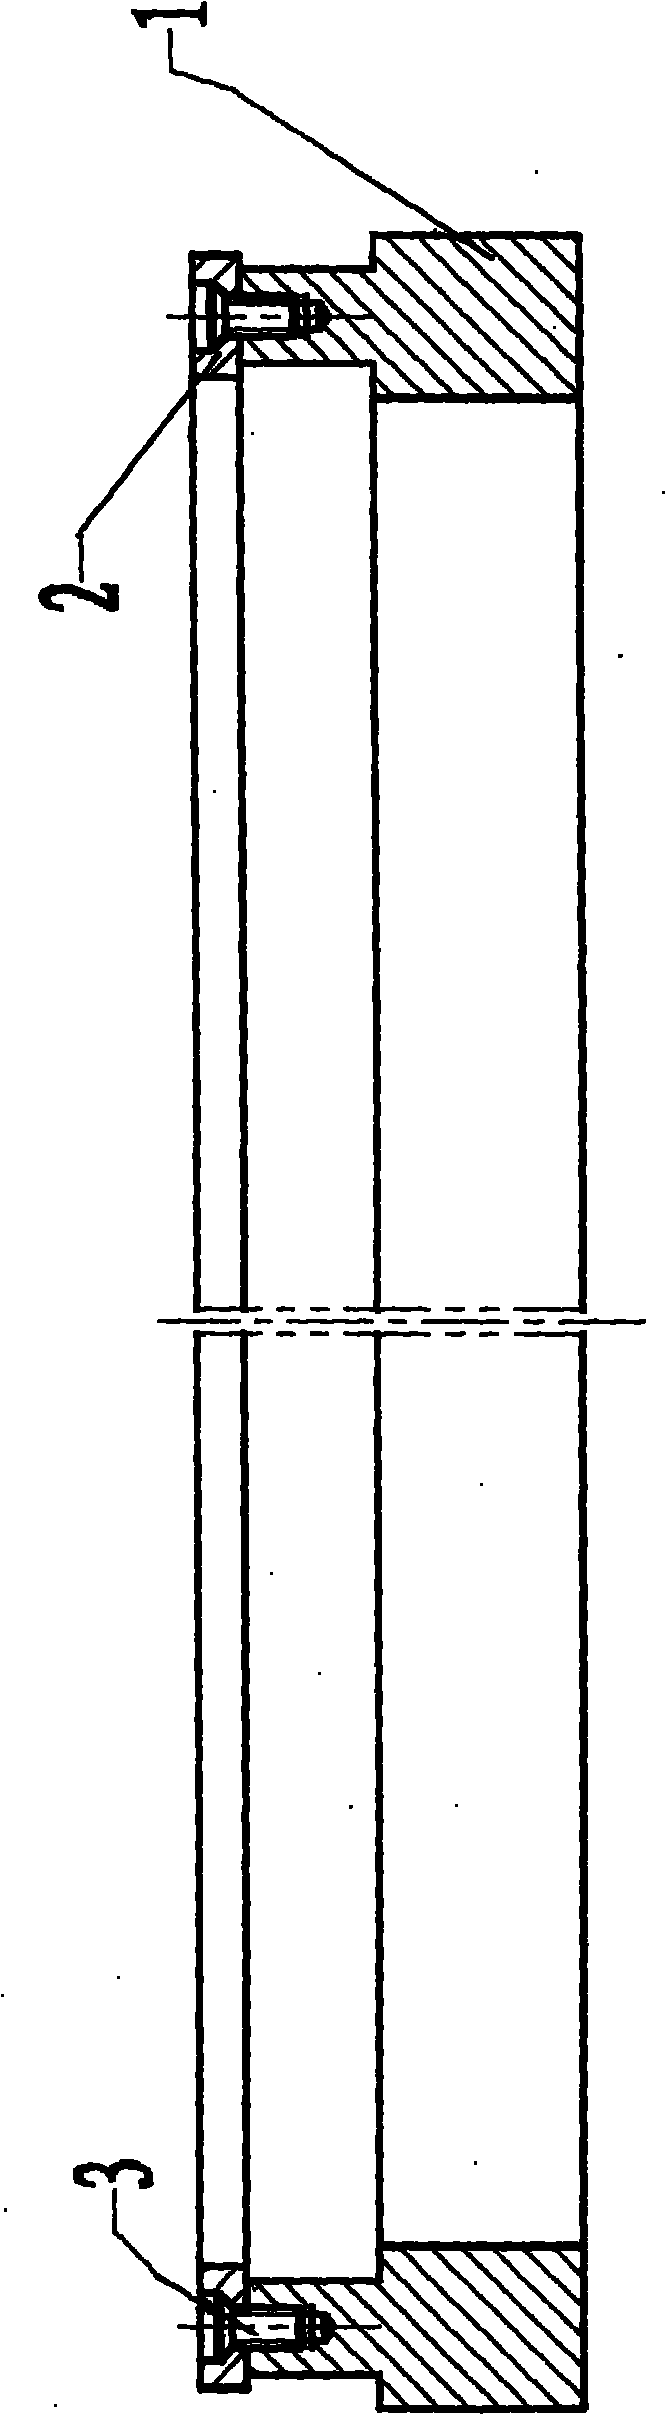 Processing method of ultra-thin annular pieces